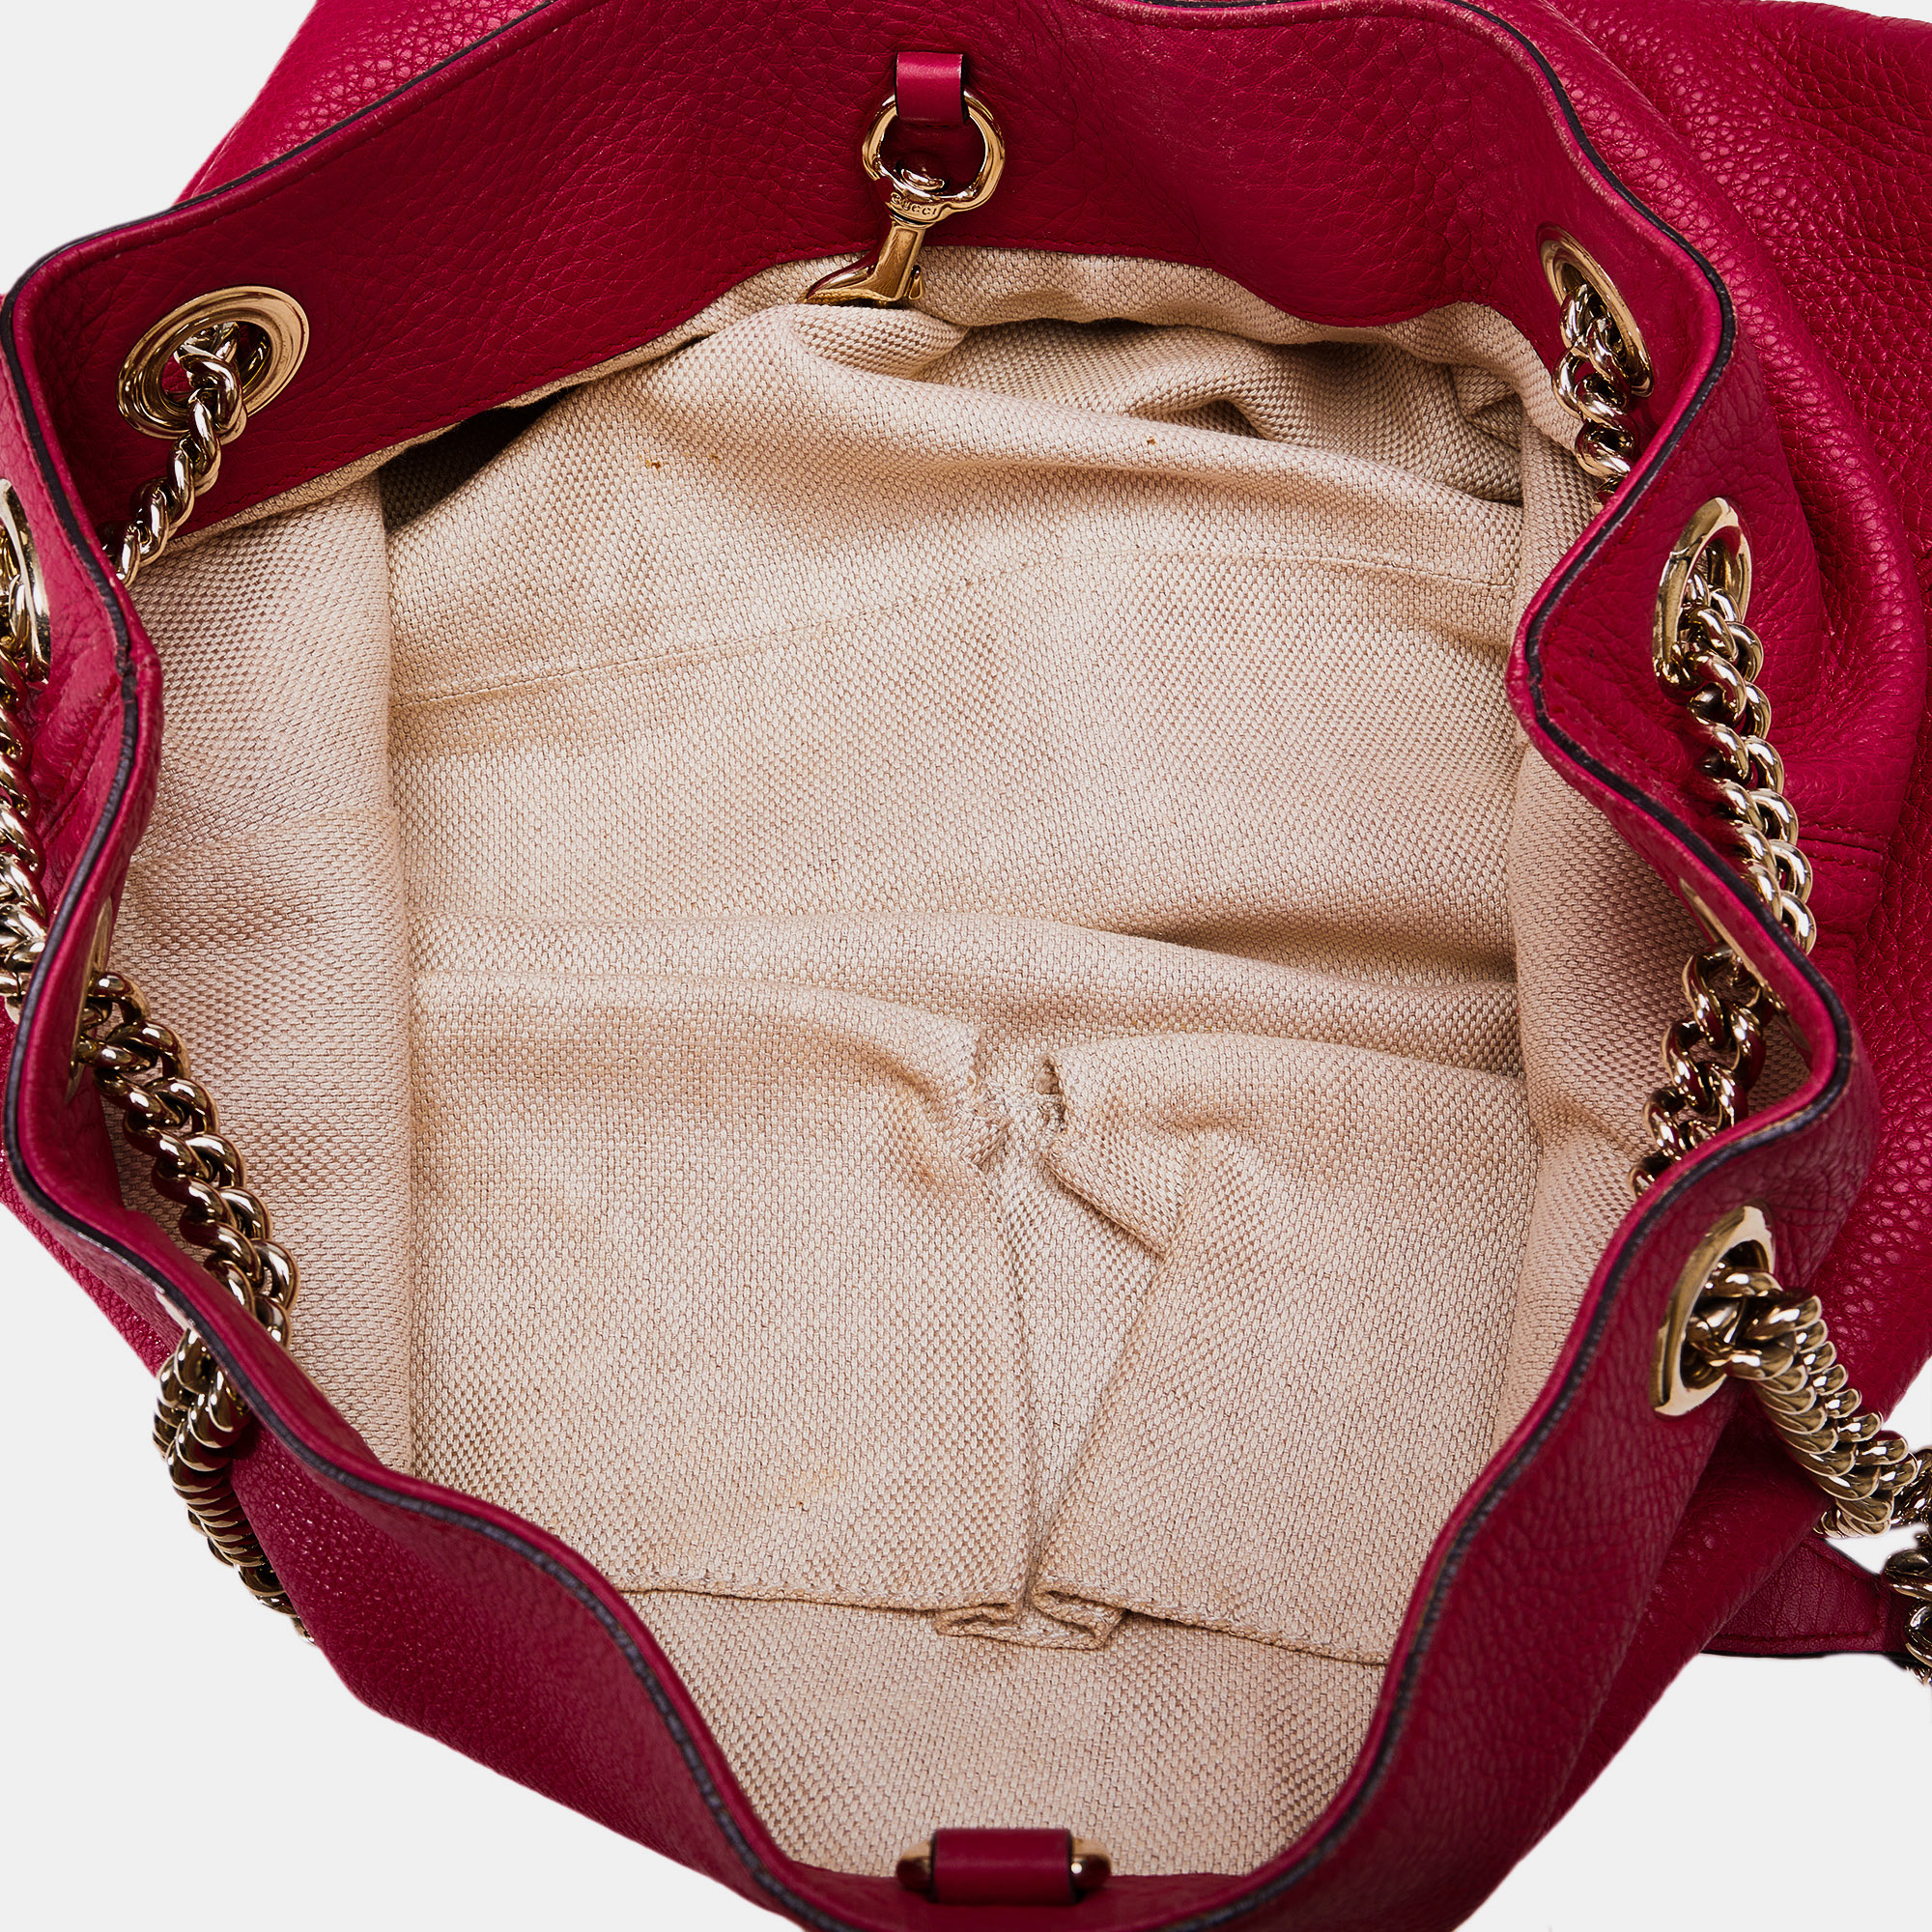 Gucci Hot Pink Leather Soho Chain Tote